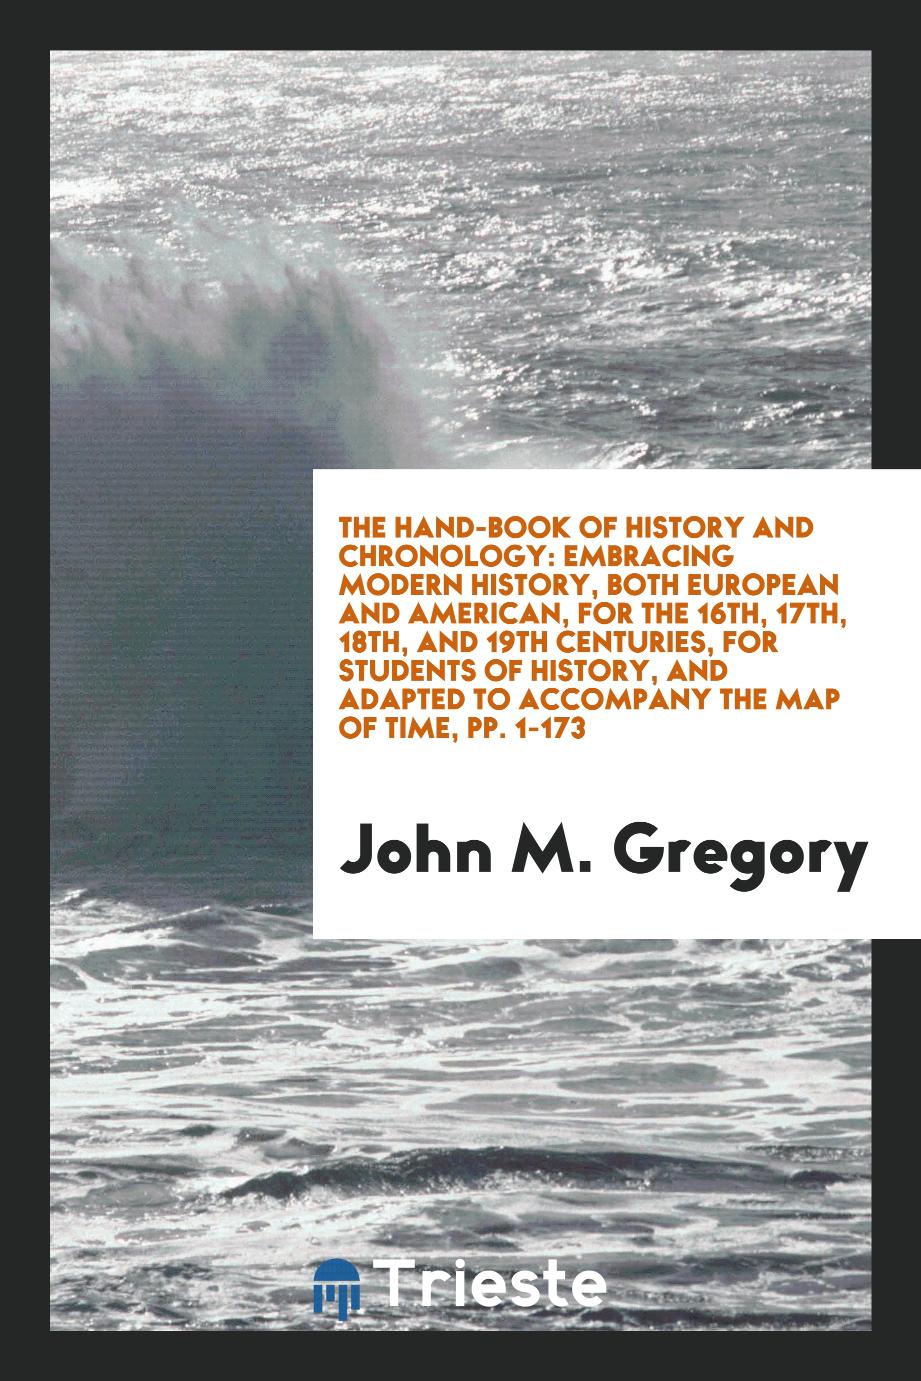 The Hand-Book of History and Chronology: Embracing Modern History, Both European and American, for the 16th, 17th, 18th, and 19th Centuries, for Students of History, and Adapted to Accompany the Map of Time, pp. 1-173